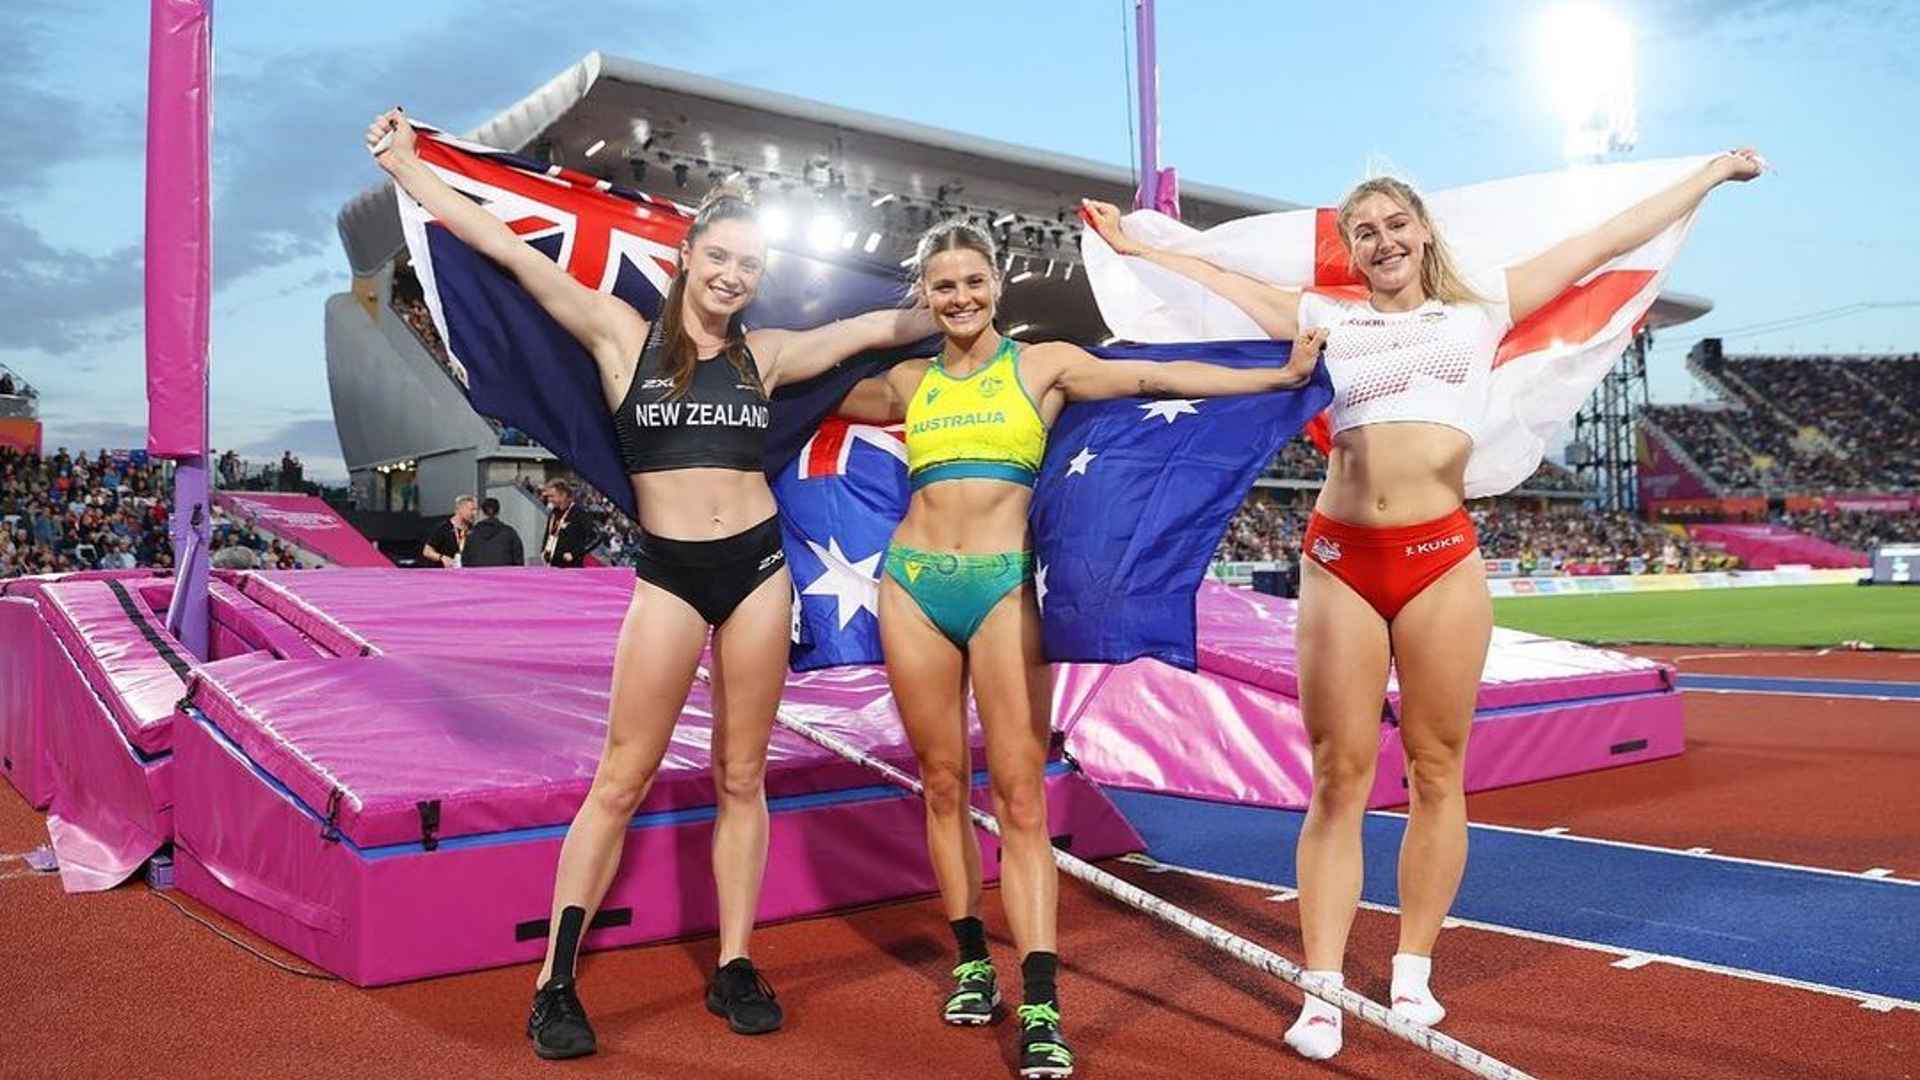 Nina Kennedy (middle) and other medalists holding their nation's flags at the Commonwealth Games 2022 (Image Credits - Instagram/ @ninakennedy_)